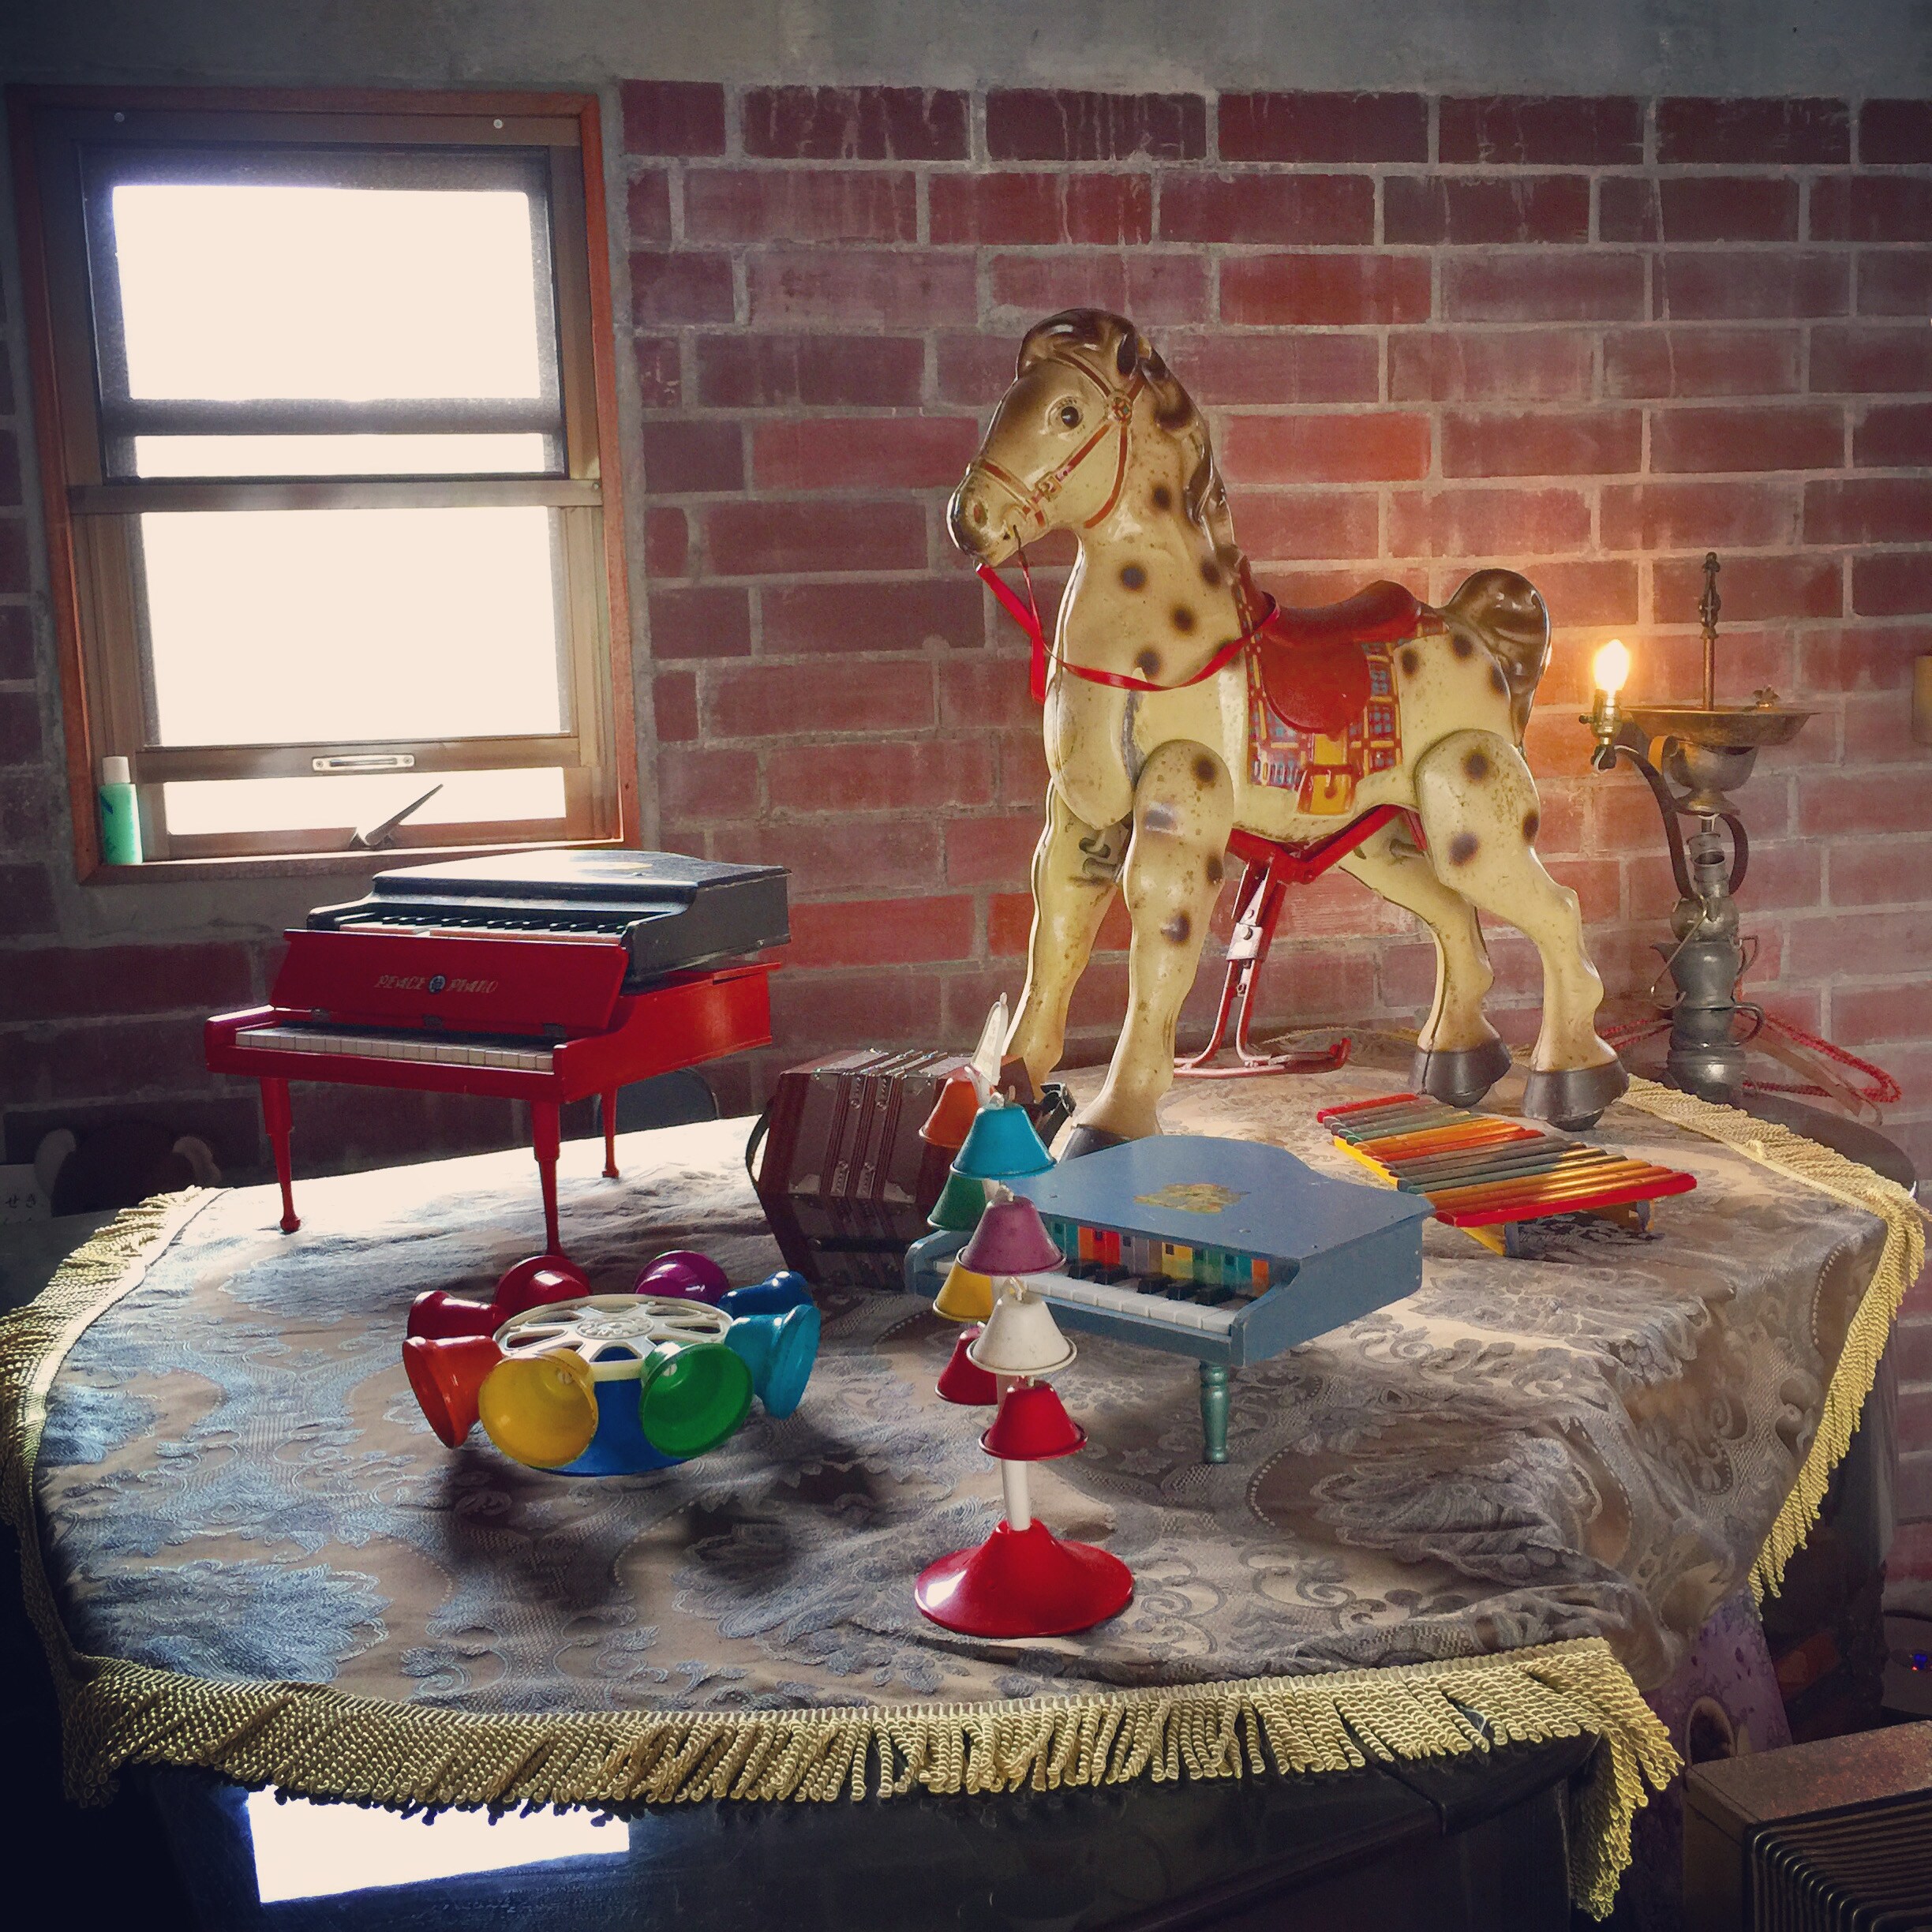 There are grand pianos, numerous toy pianos, and musical instruments. (Grand piano cottage)